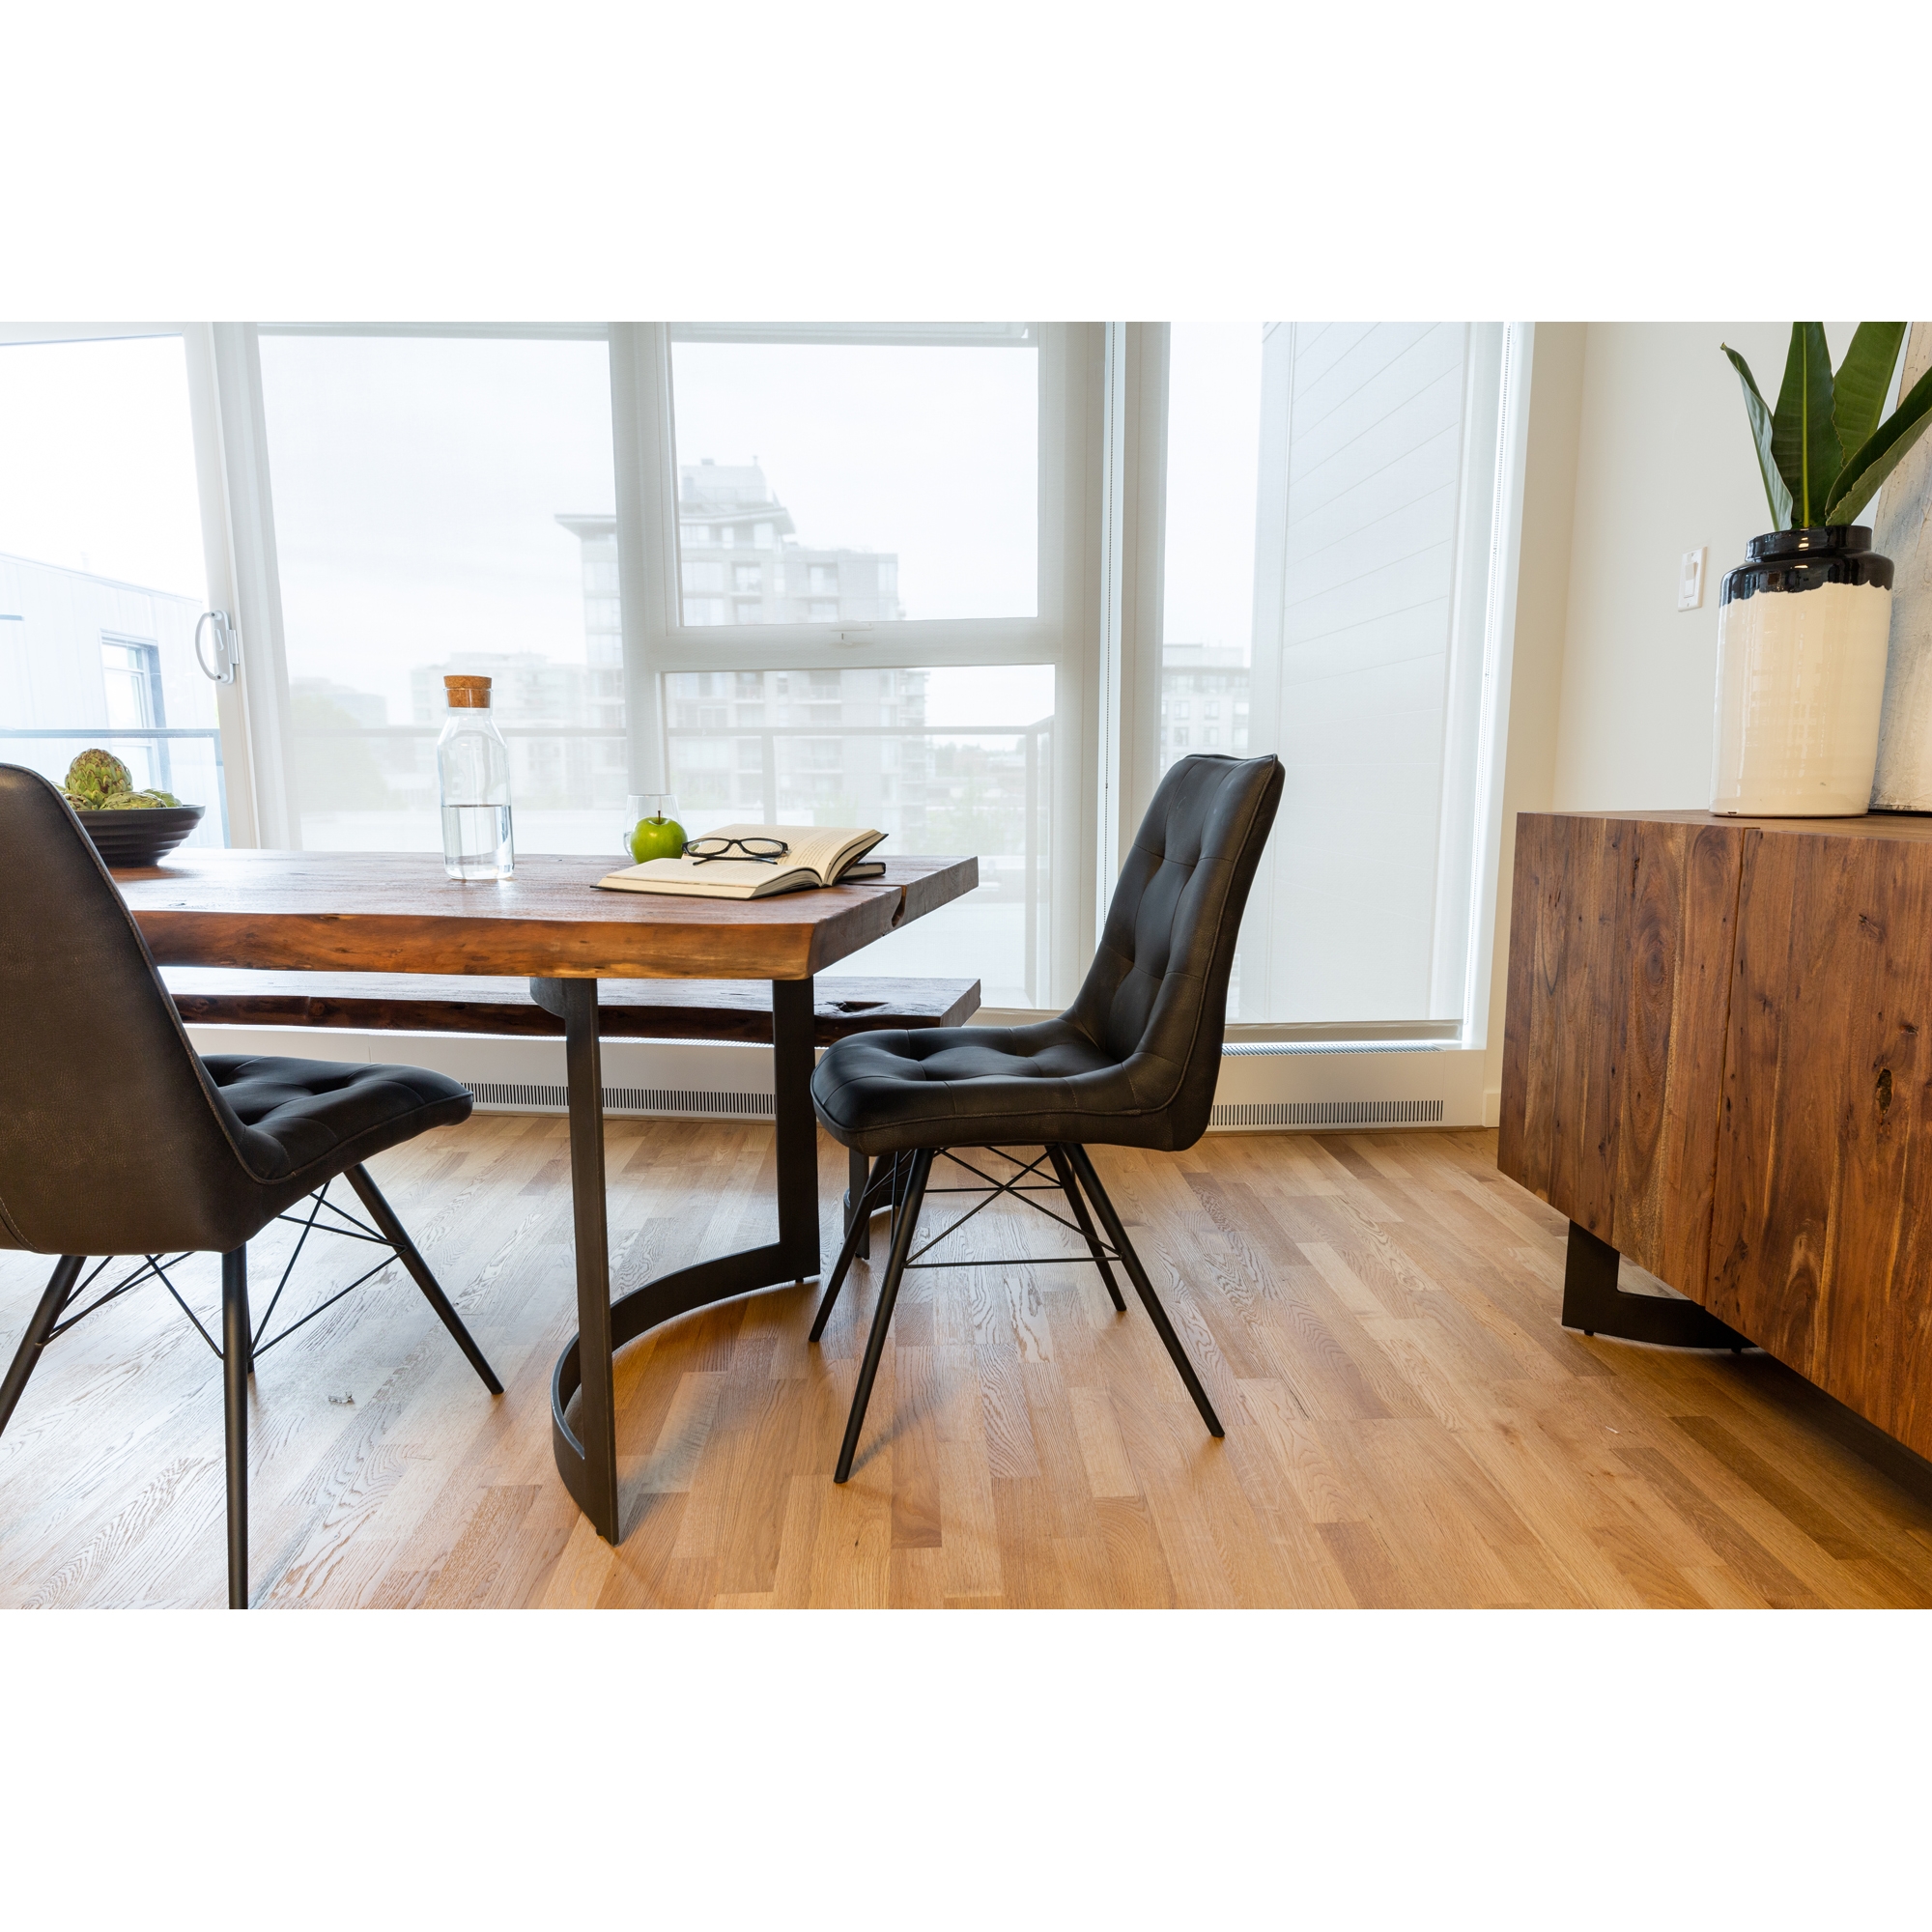 Bent Dining Table Small - Image 10